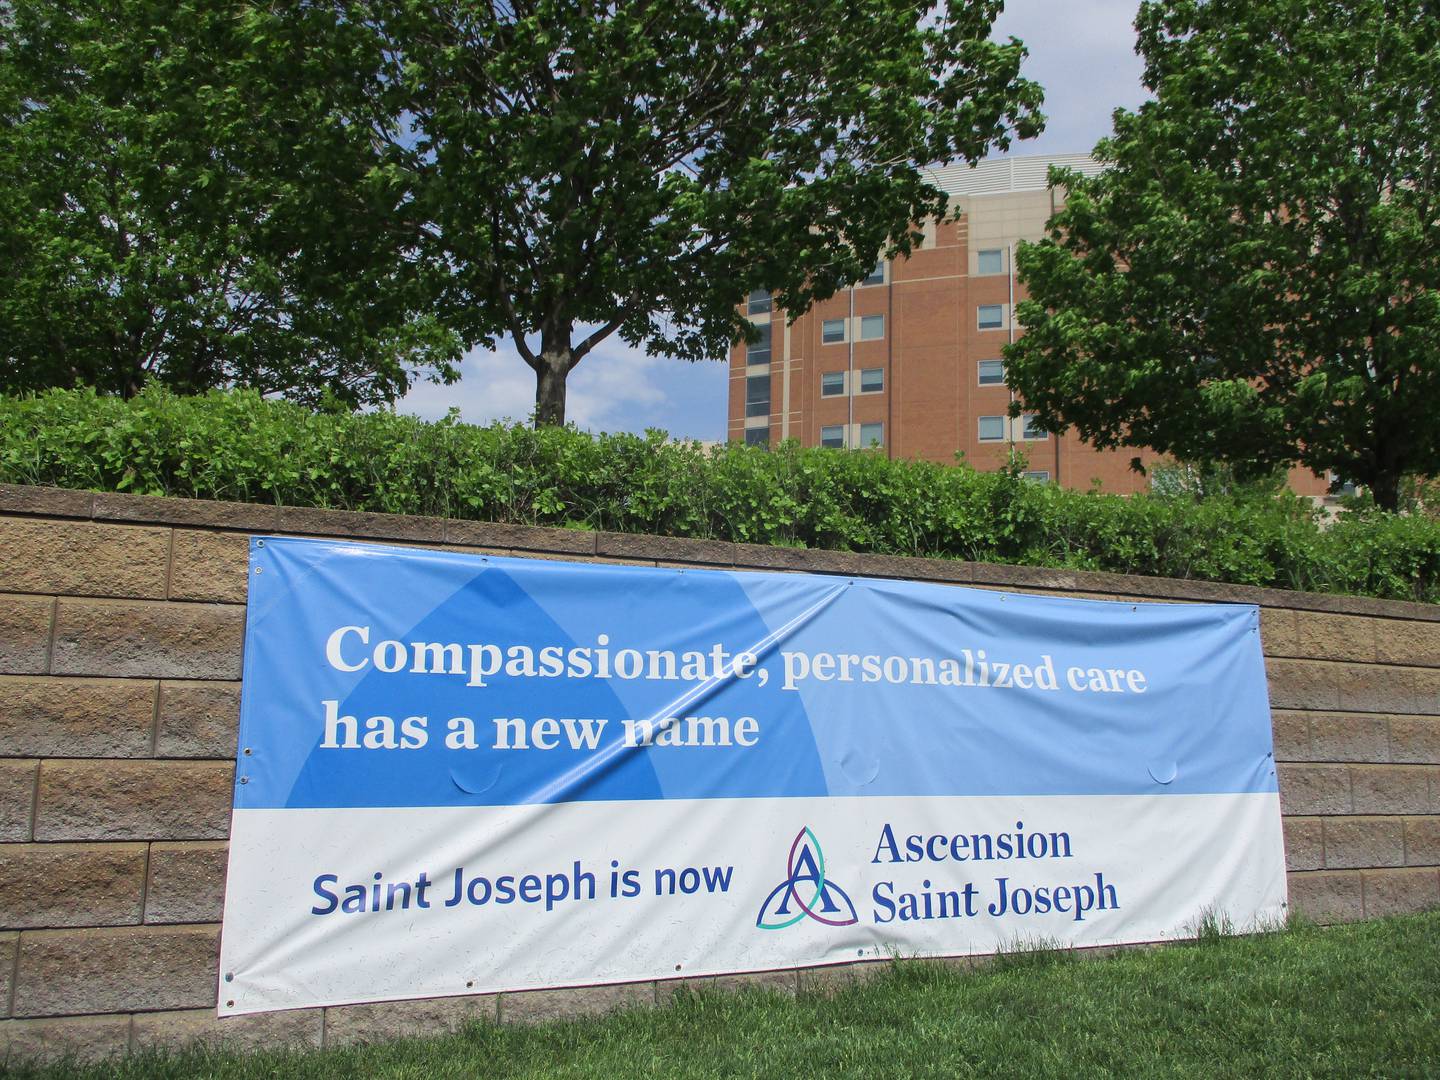 Ascension Saint Joseph – Joliet as of May 19, 2022 was using temporary banners to announce its new name since a corporate restructuring was completed in early April.